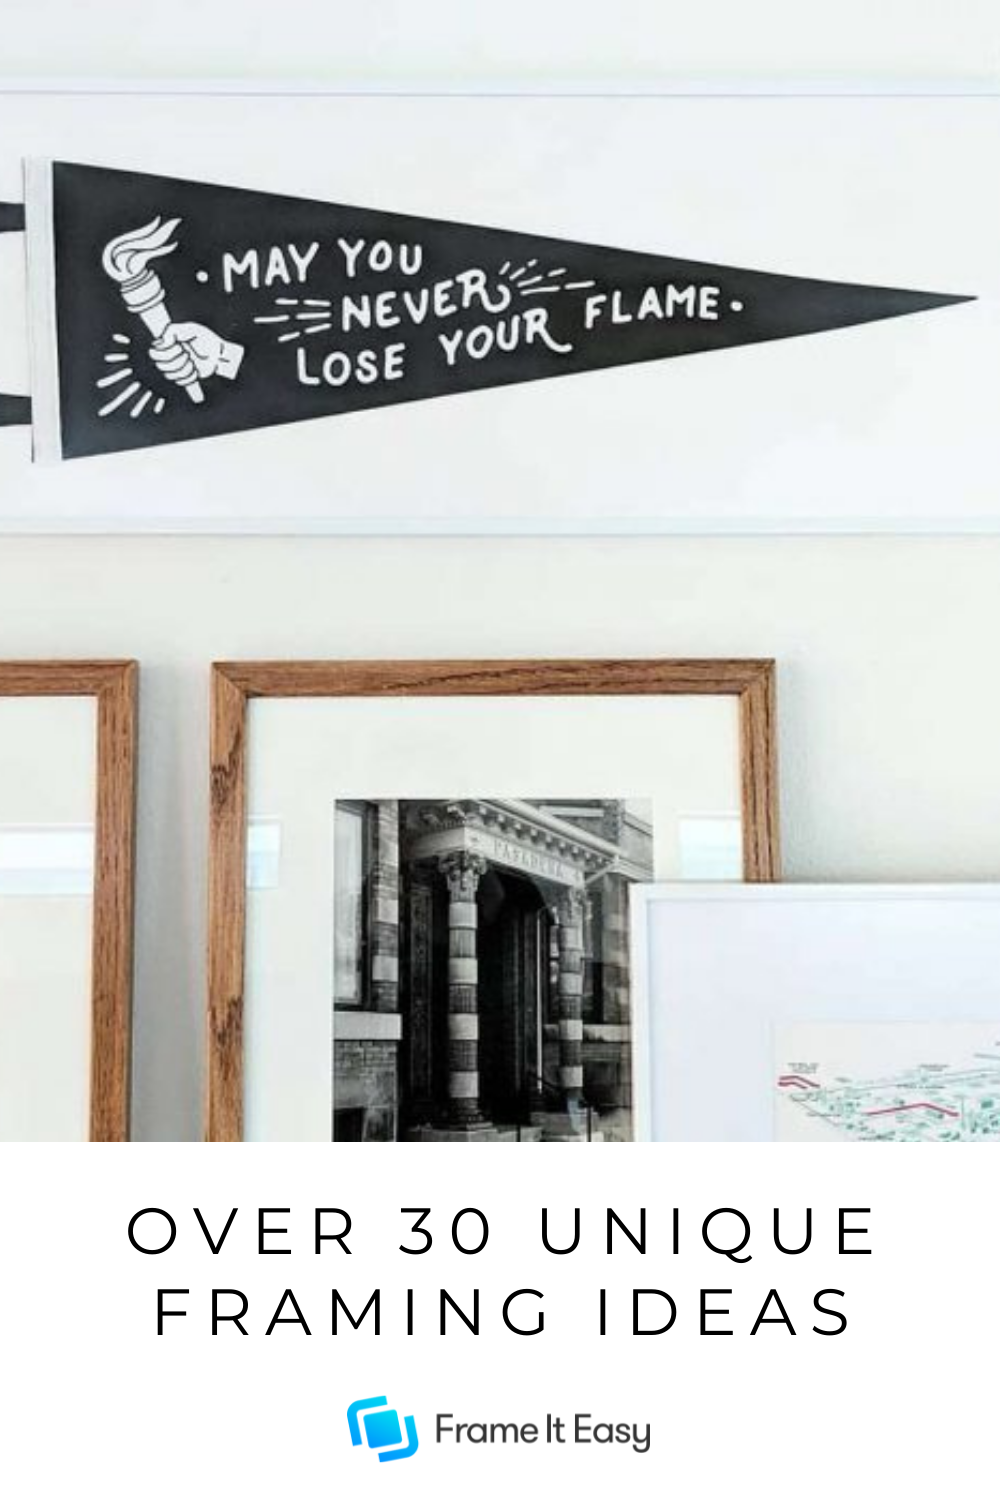 33 STUNNING PICTURE FRAMING IDEAS YOUR HOME IS CRYING OUT FOR - Frameworks,  Miami, FL